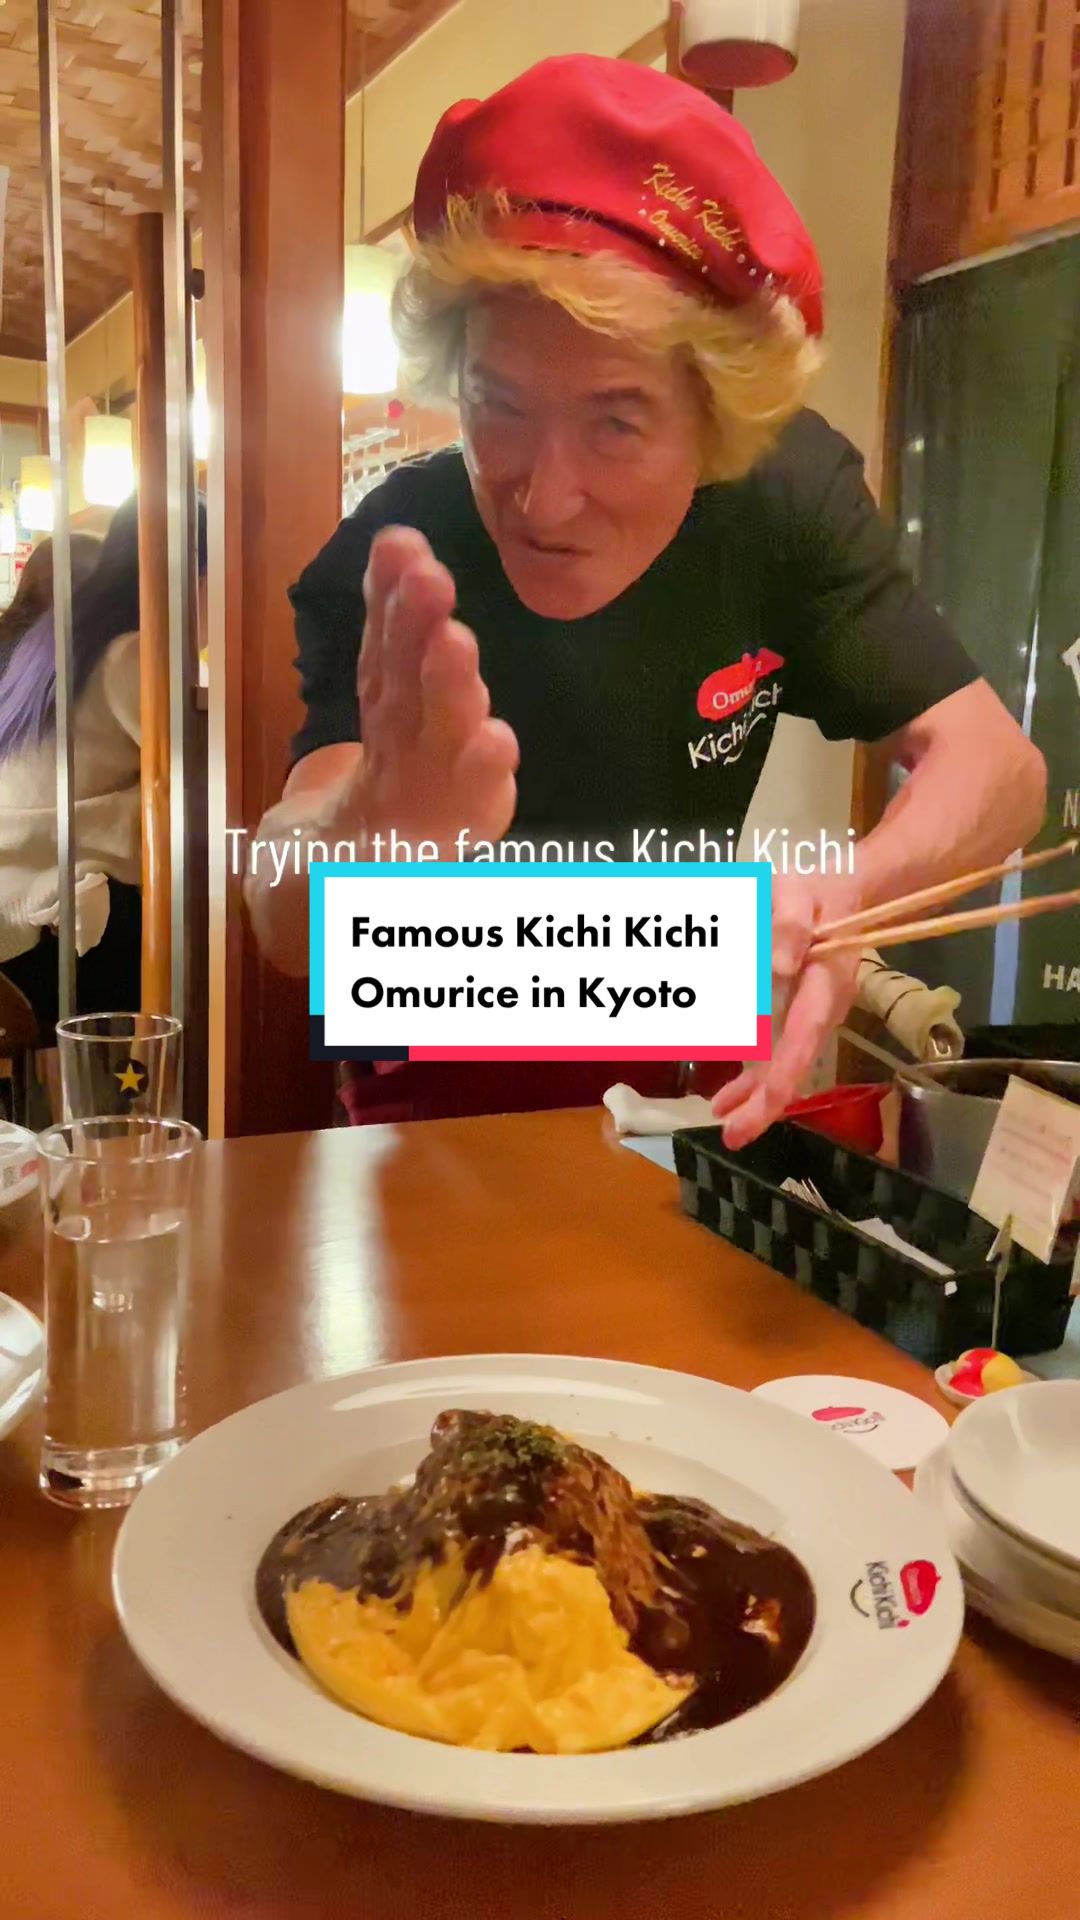 The man, the myth, the legend!  Get there before 5pm if you don’t have a reservation!  #japan #japanesefood #japaneats #japantips #traveljapan #japan2022 #japanrestaurant #kichikichi_omurice  ដែលបានបង្កើតដោយ Nathalia and Tom ជាមួយ original sound របស់ Nathalia and Tom